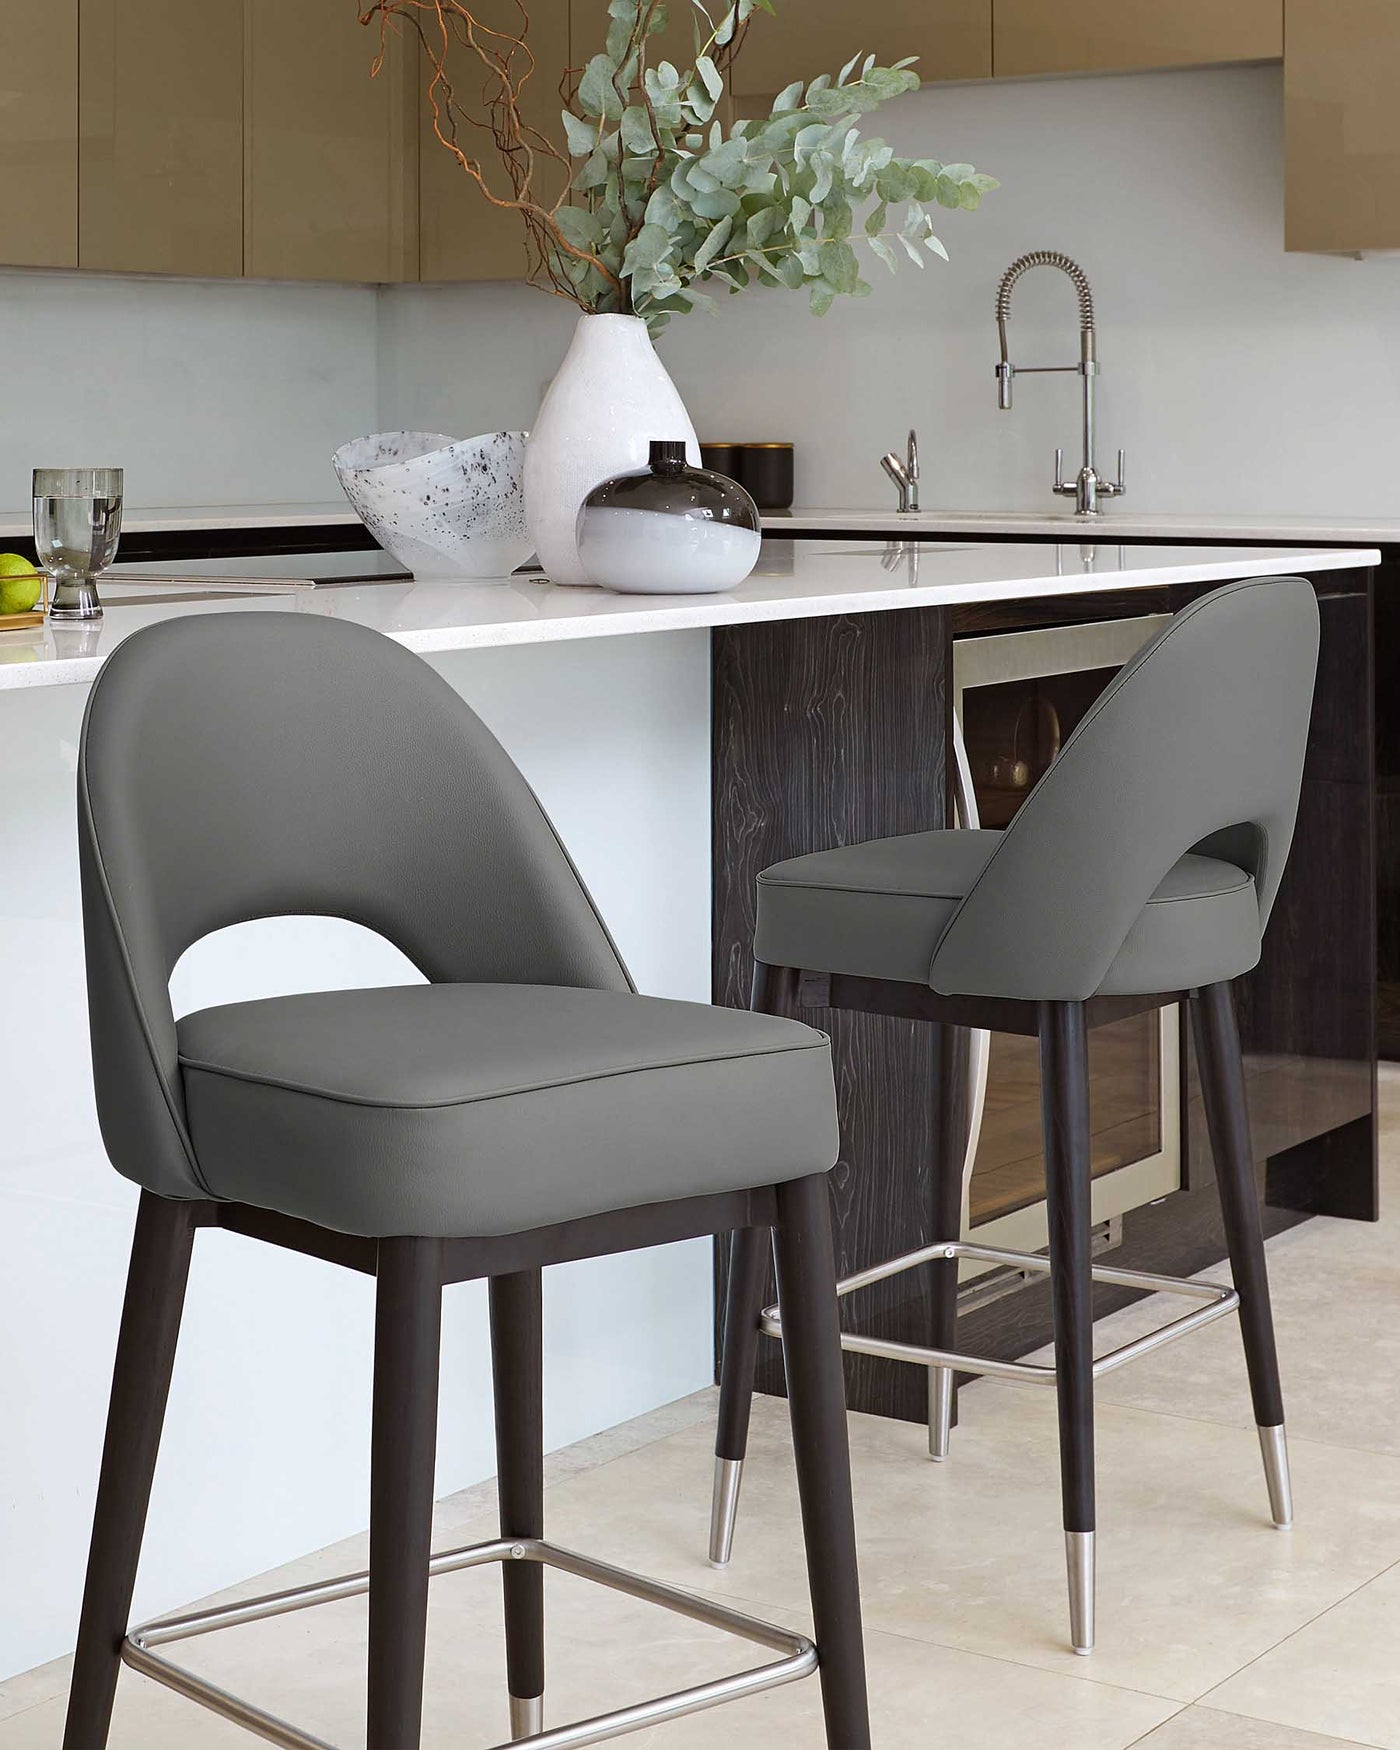 Two modern bar stools with dark grey upholstery and dark wooden legs, featuring a low back design and a metallic footrest.